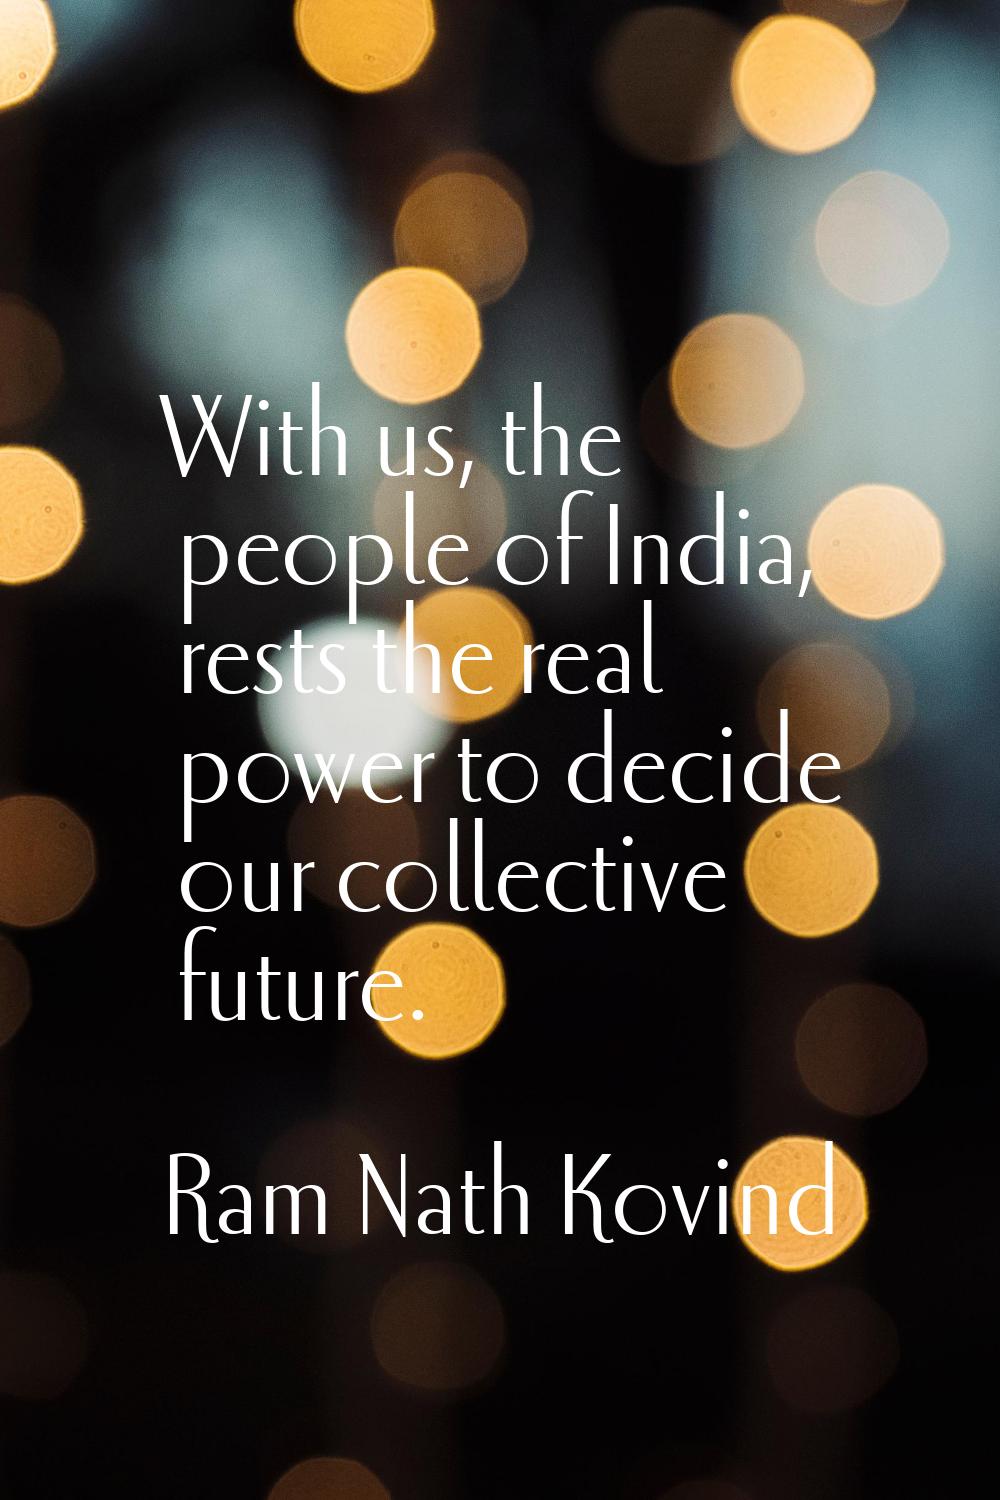 With us, the people of India, rests the real power to decide our collective future.